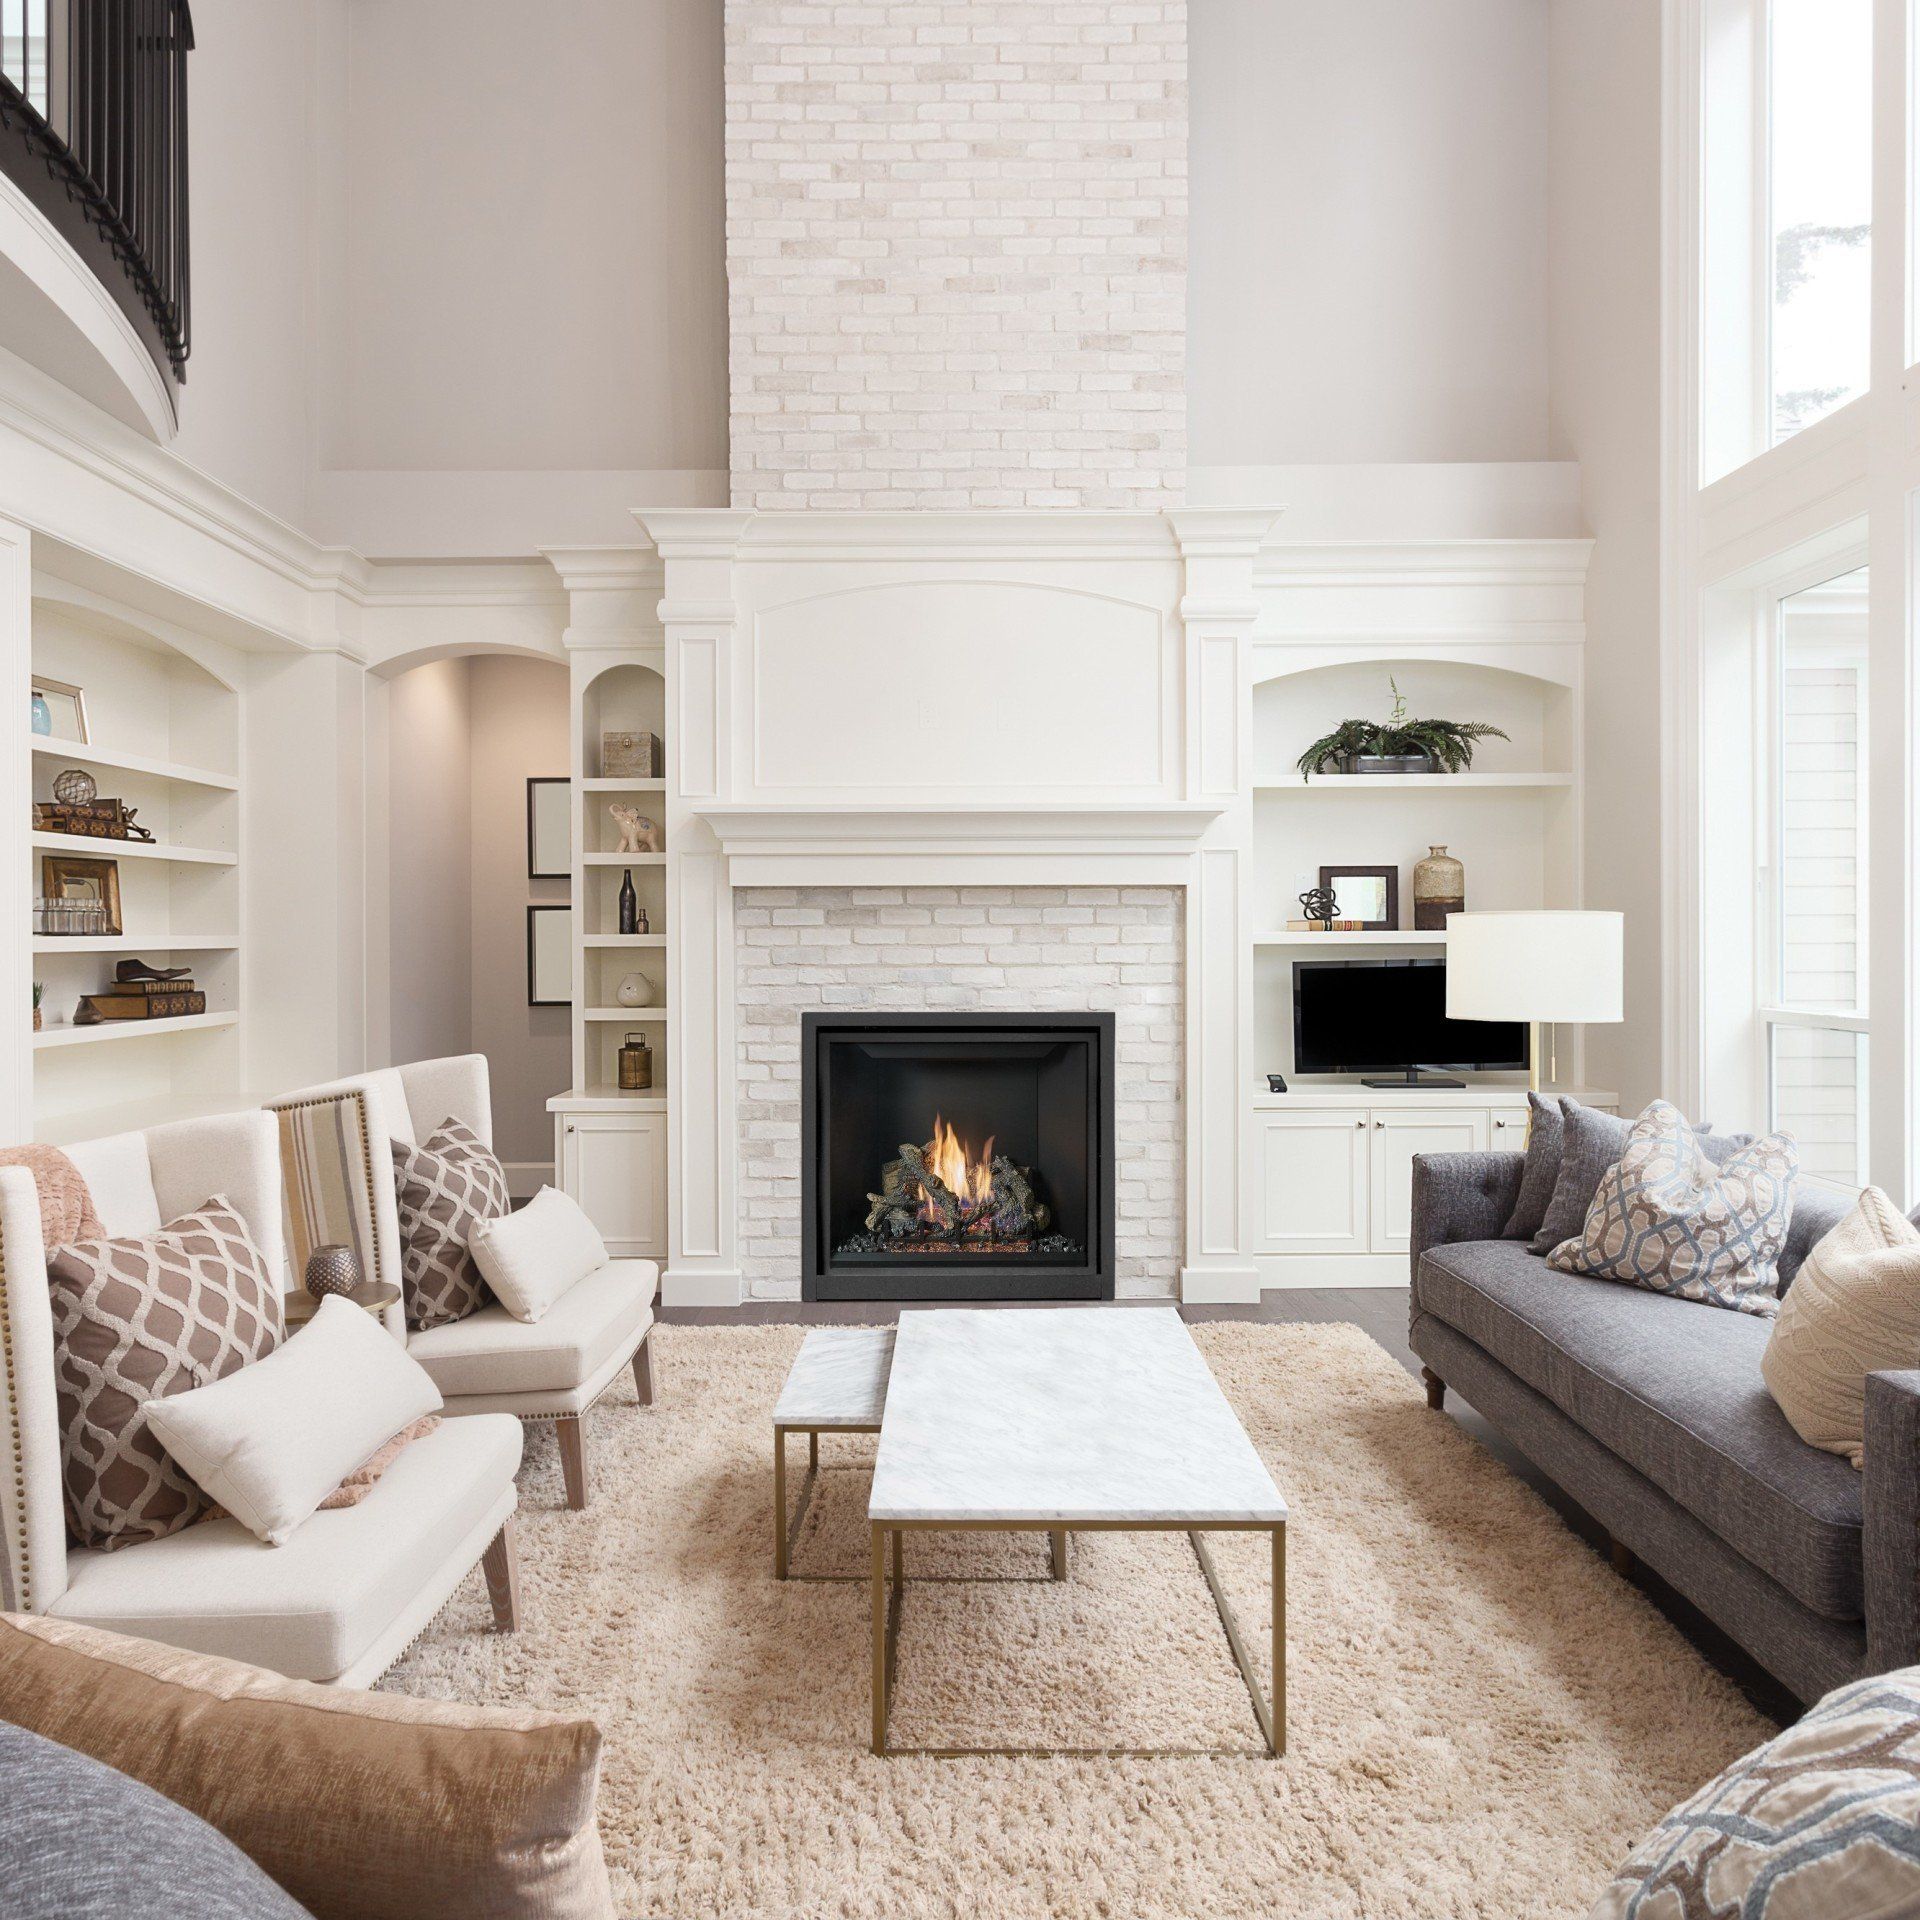 The Fireplace Stop | Custom Fireplaces, Stoves, Furnaces & Service ...